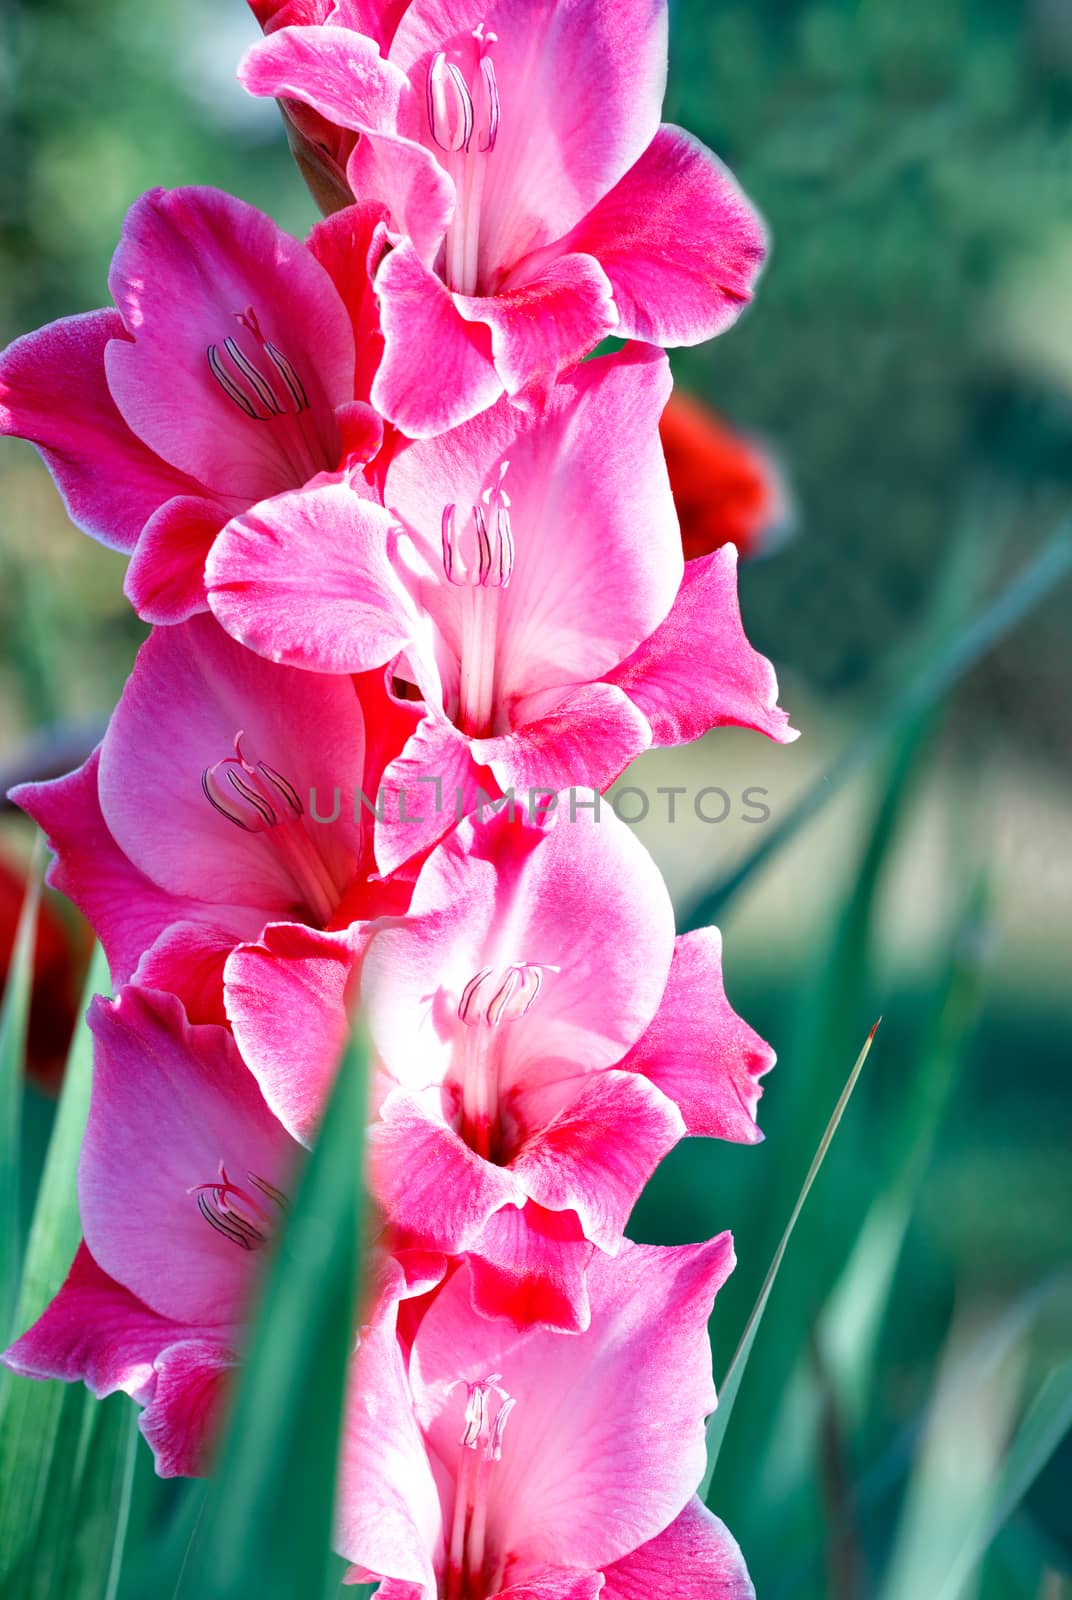 Delicate pink-red gladioli with velvet petals in the rays of soft sunlight bloom in the garden against a background of green leaves, vertical image.